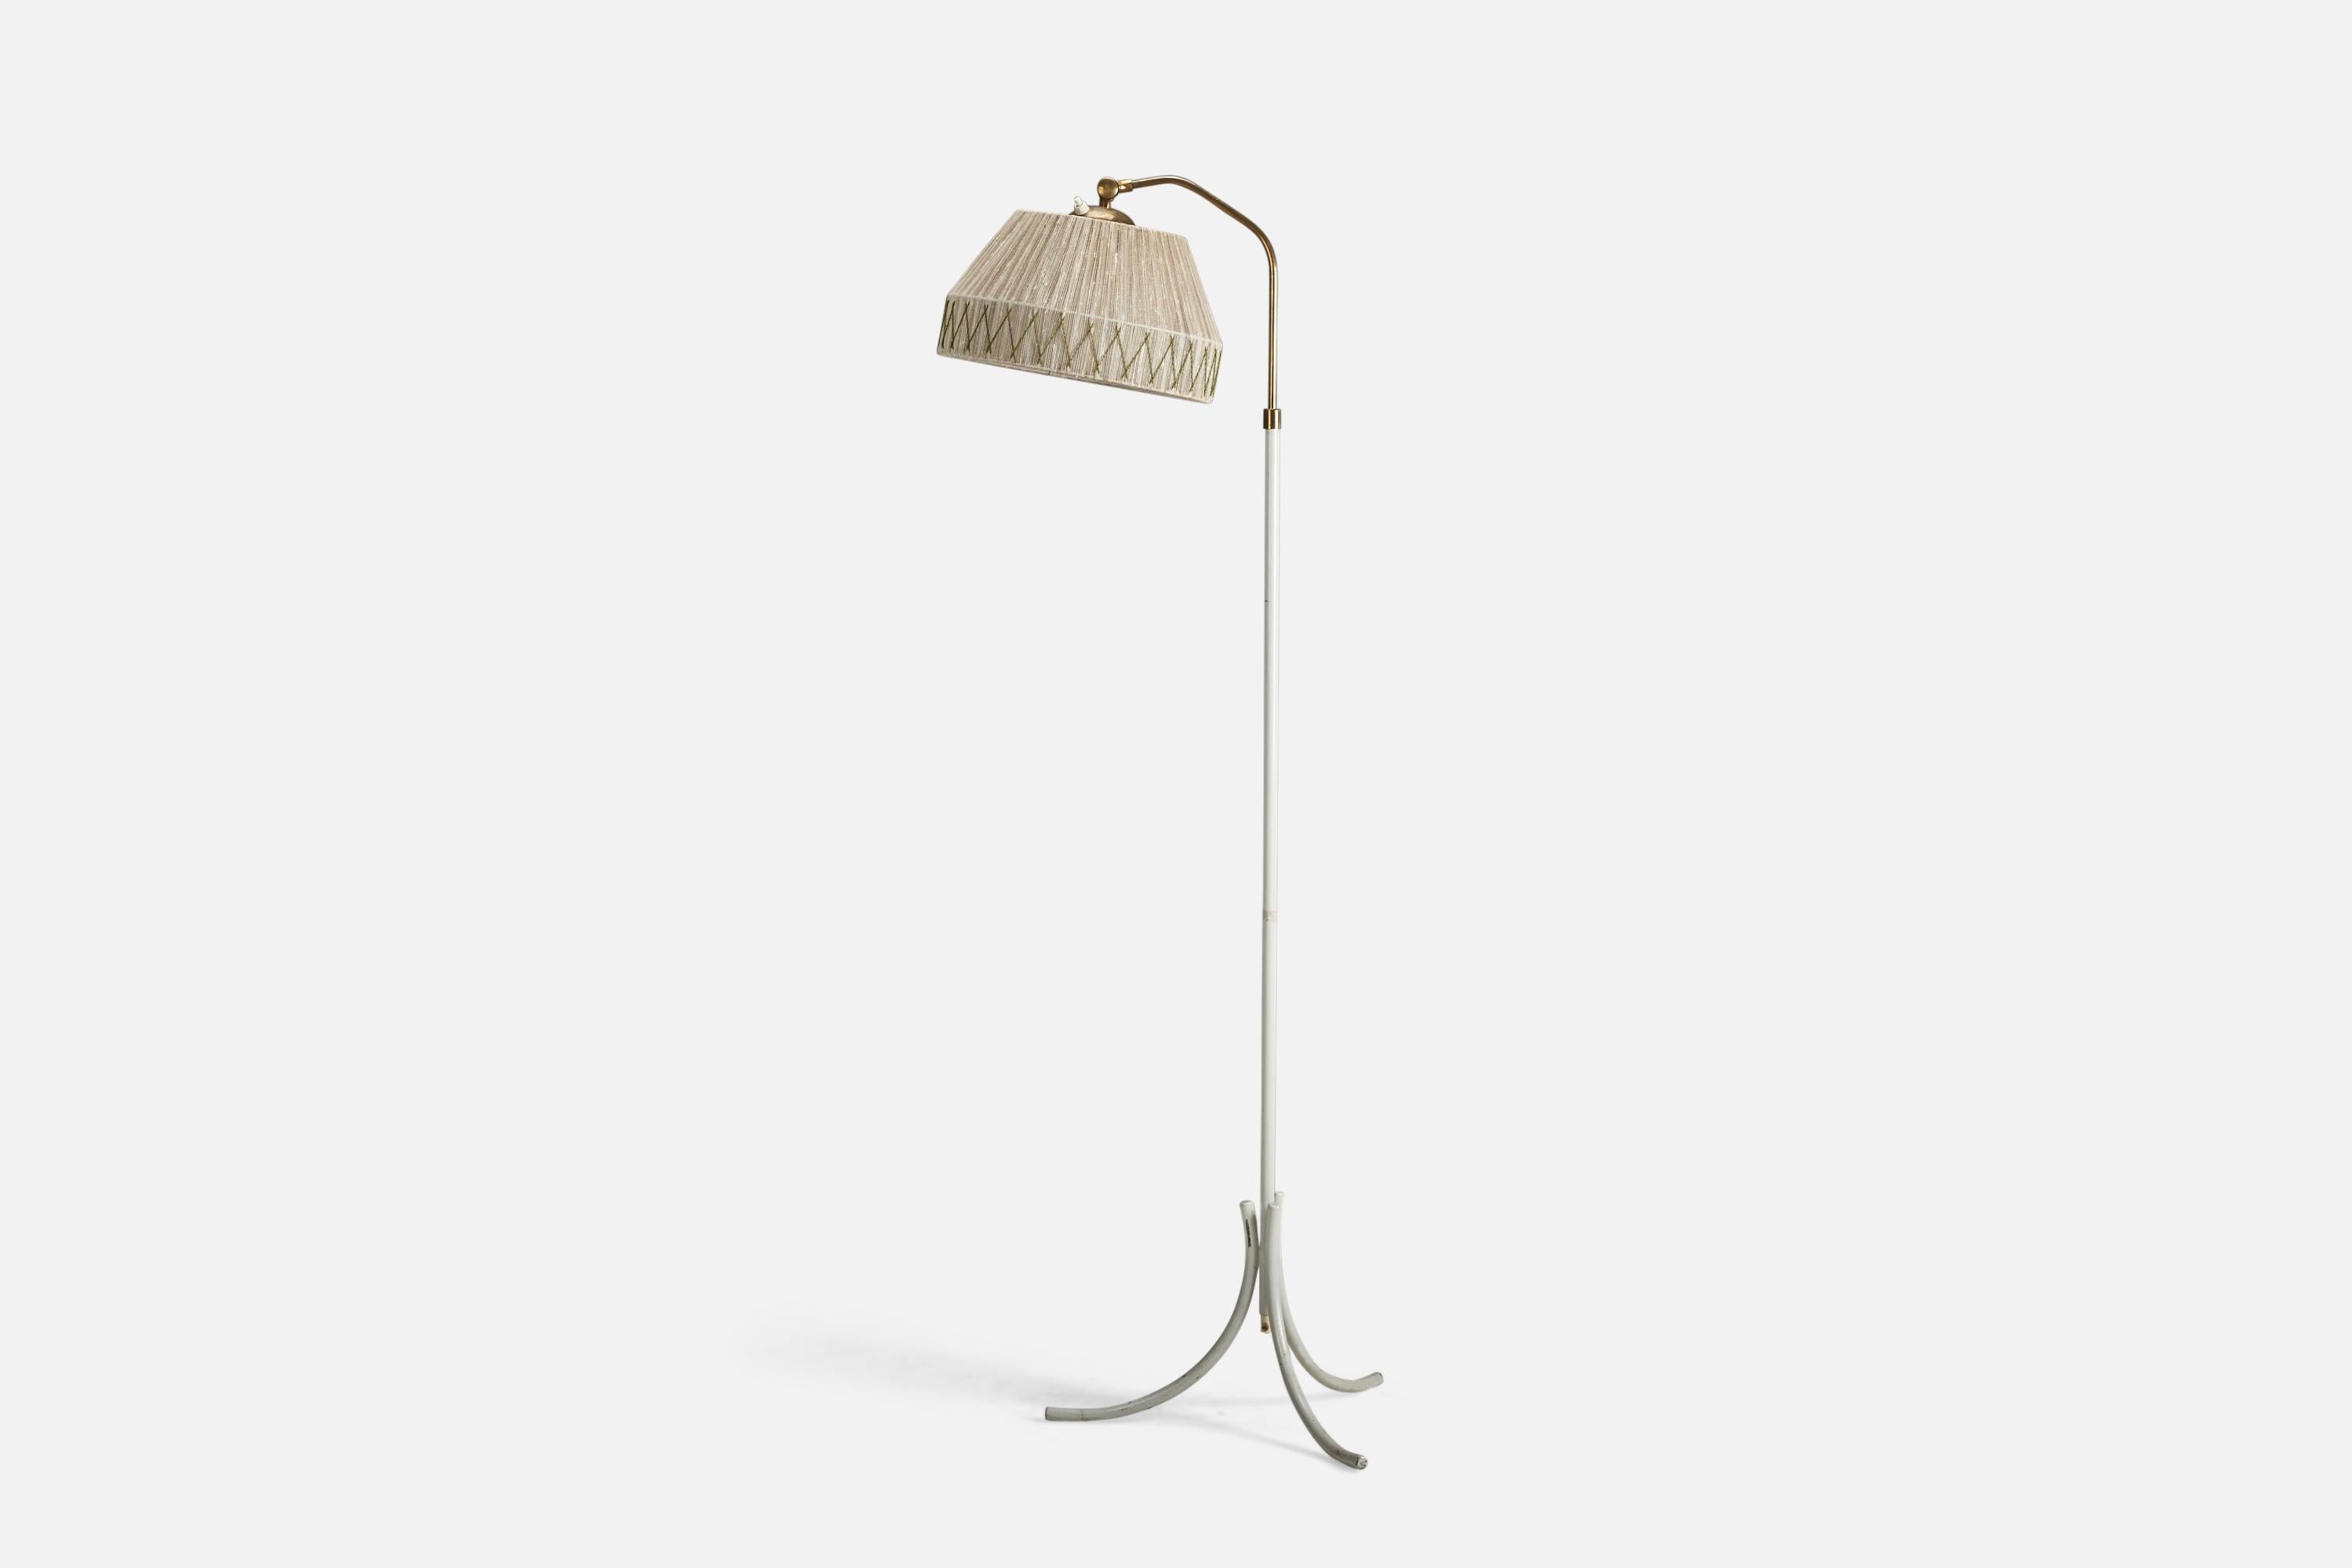 A brass, metal and string floor lamp designed and produced by a Finnish Designer, Finland, 1950s.

Socket takes standard E-26 medium base bulb.

There is no maximum wattage stated on the fixture.